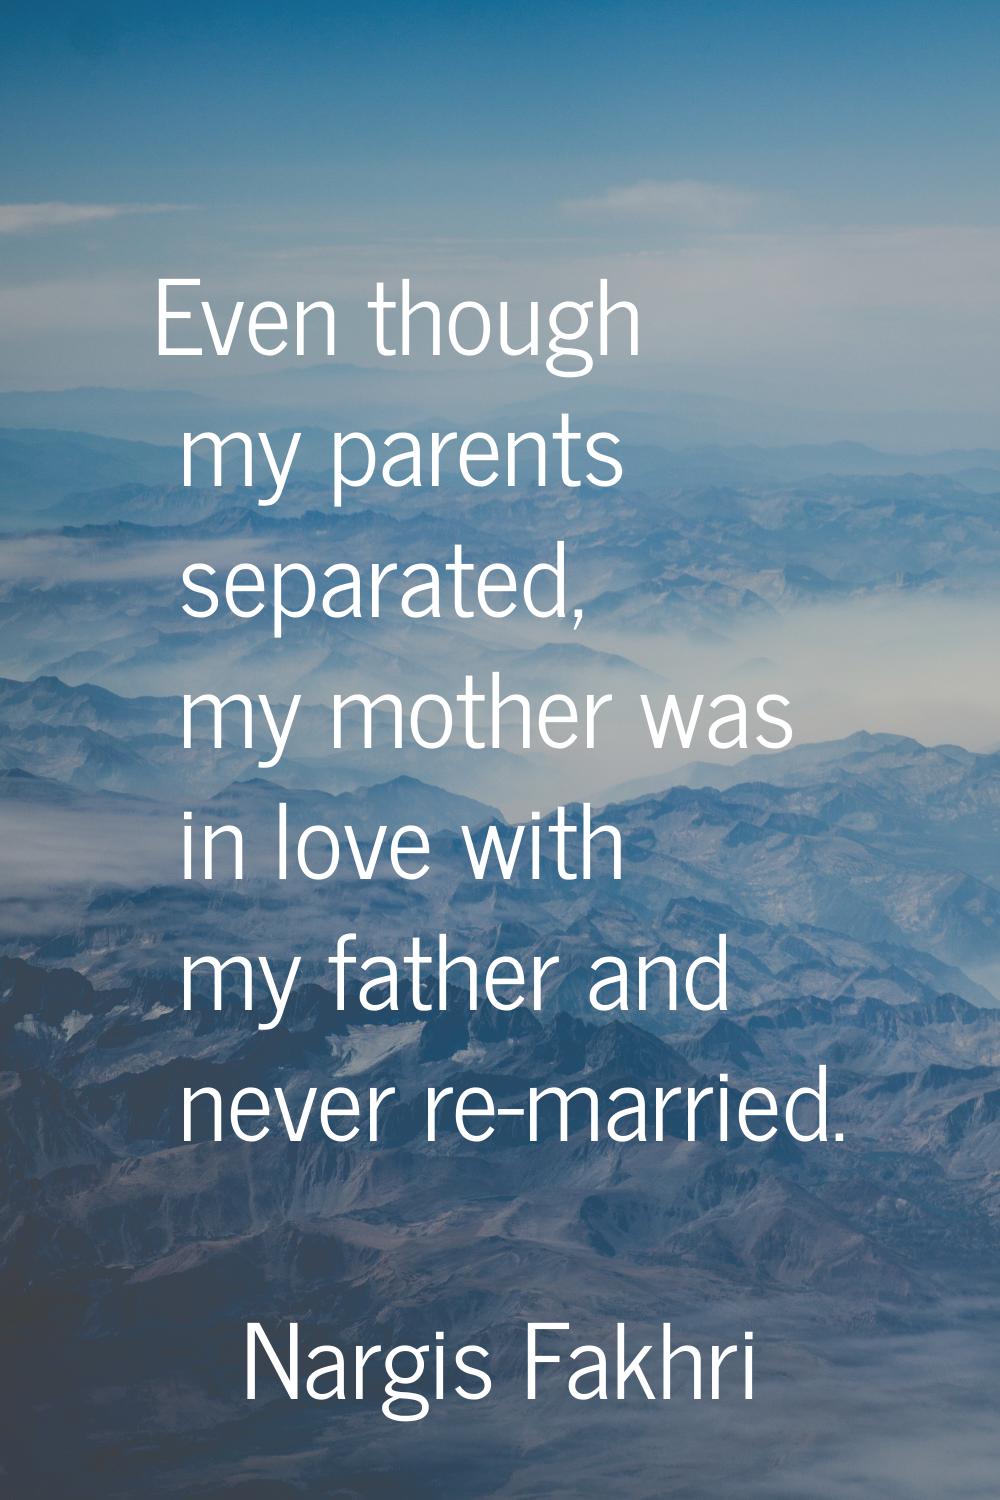 Even though my parents separated, my mother was in love with my father and never re-married.